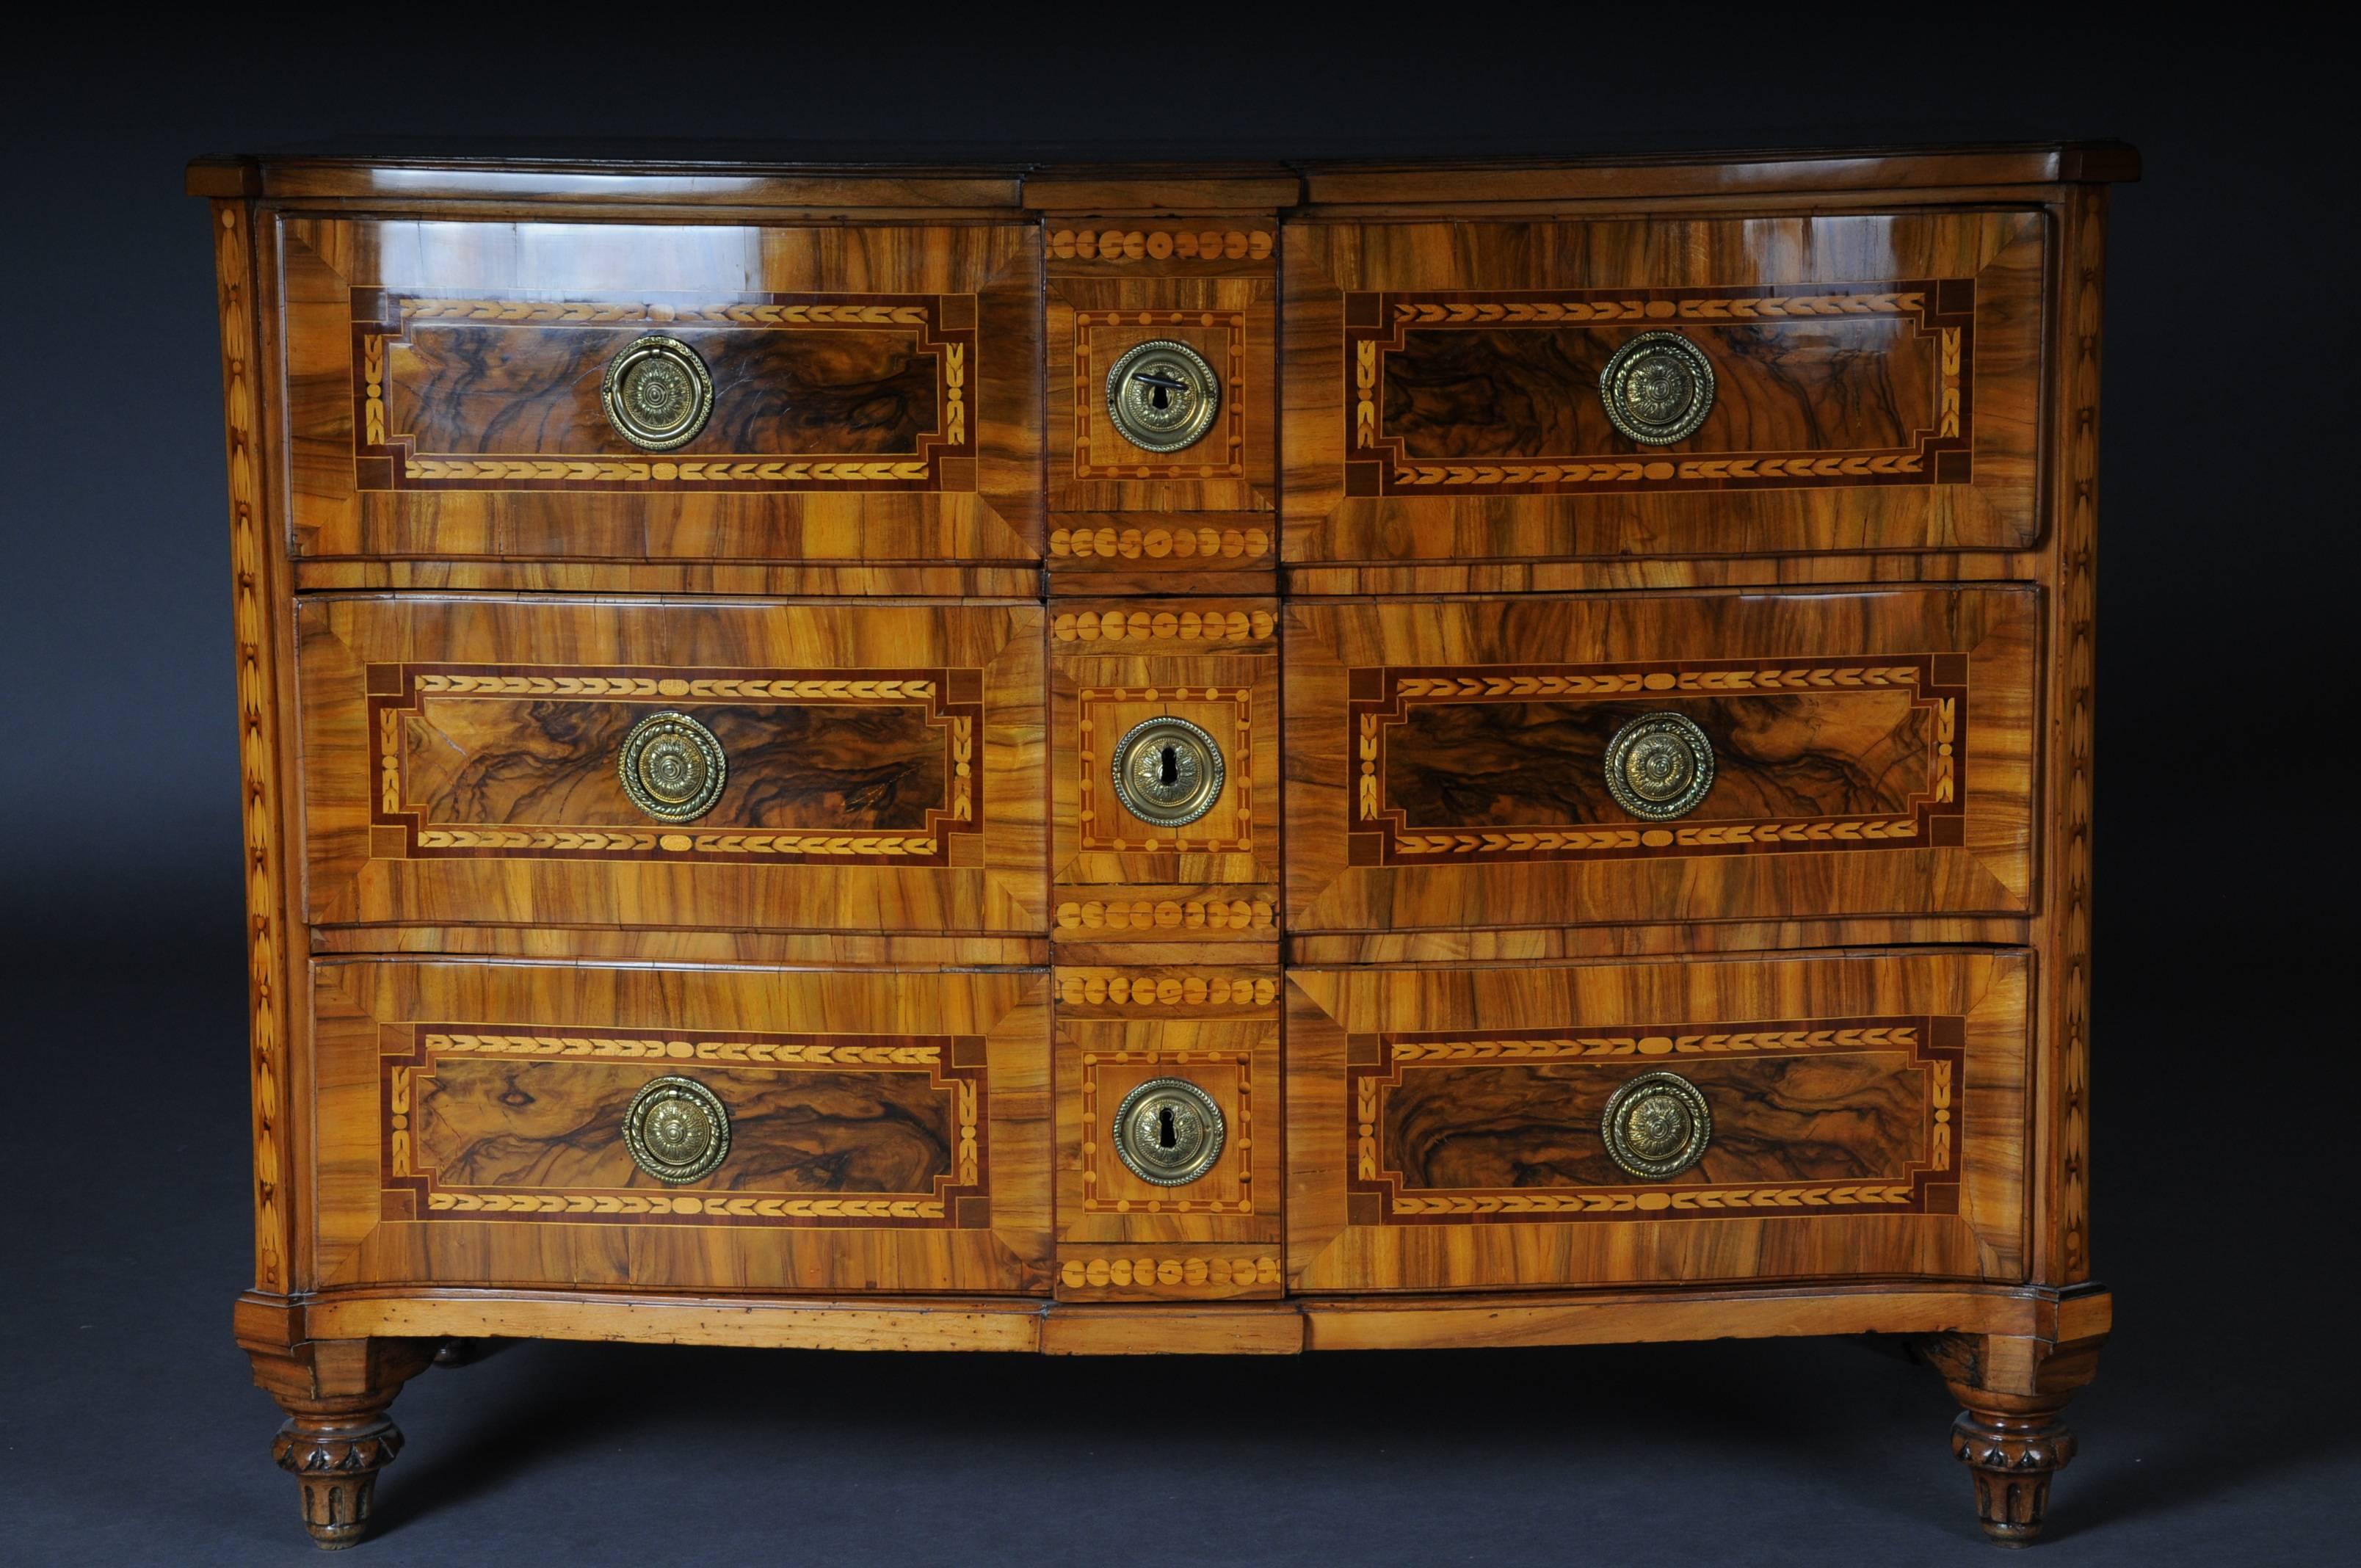 Three-pronged body made of softwood with saw-veneer walnut, walnut root and fruitwood.
Original classicistic locks and fittings with ring handles. According to the heir, the dresser was acquired in the 80s for over 20,000 DM.

(D-78).